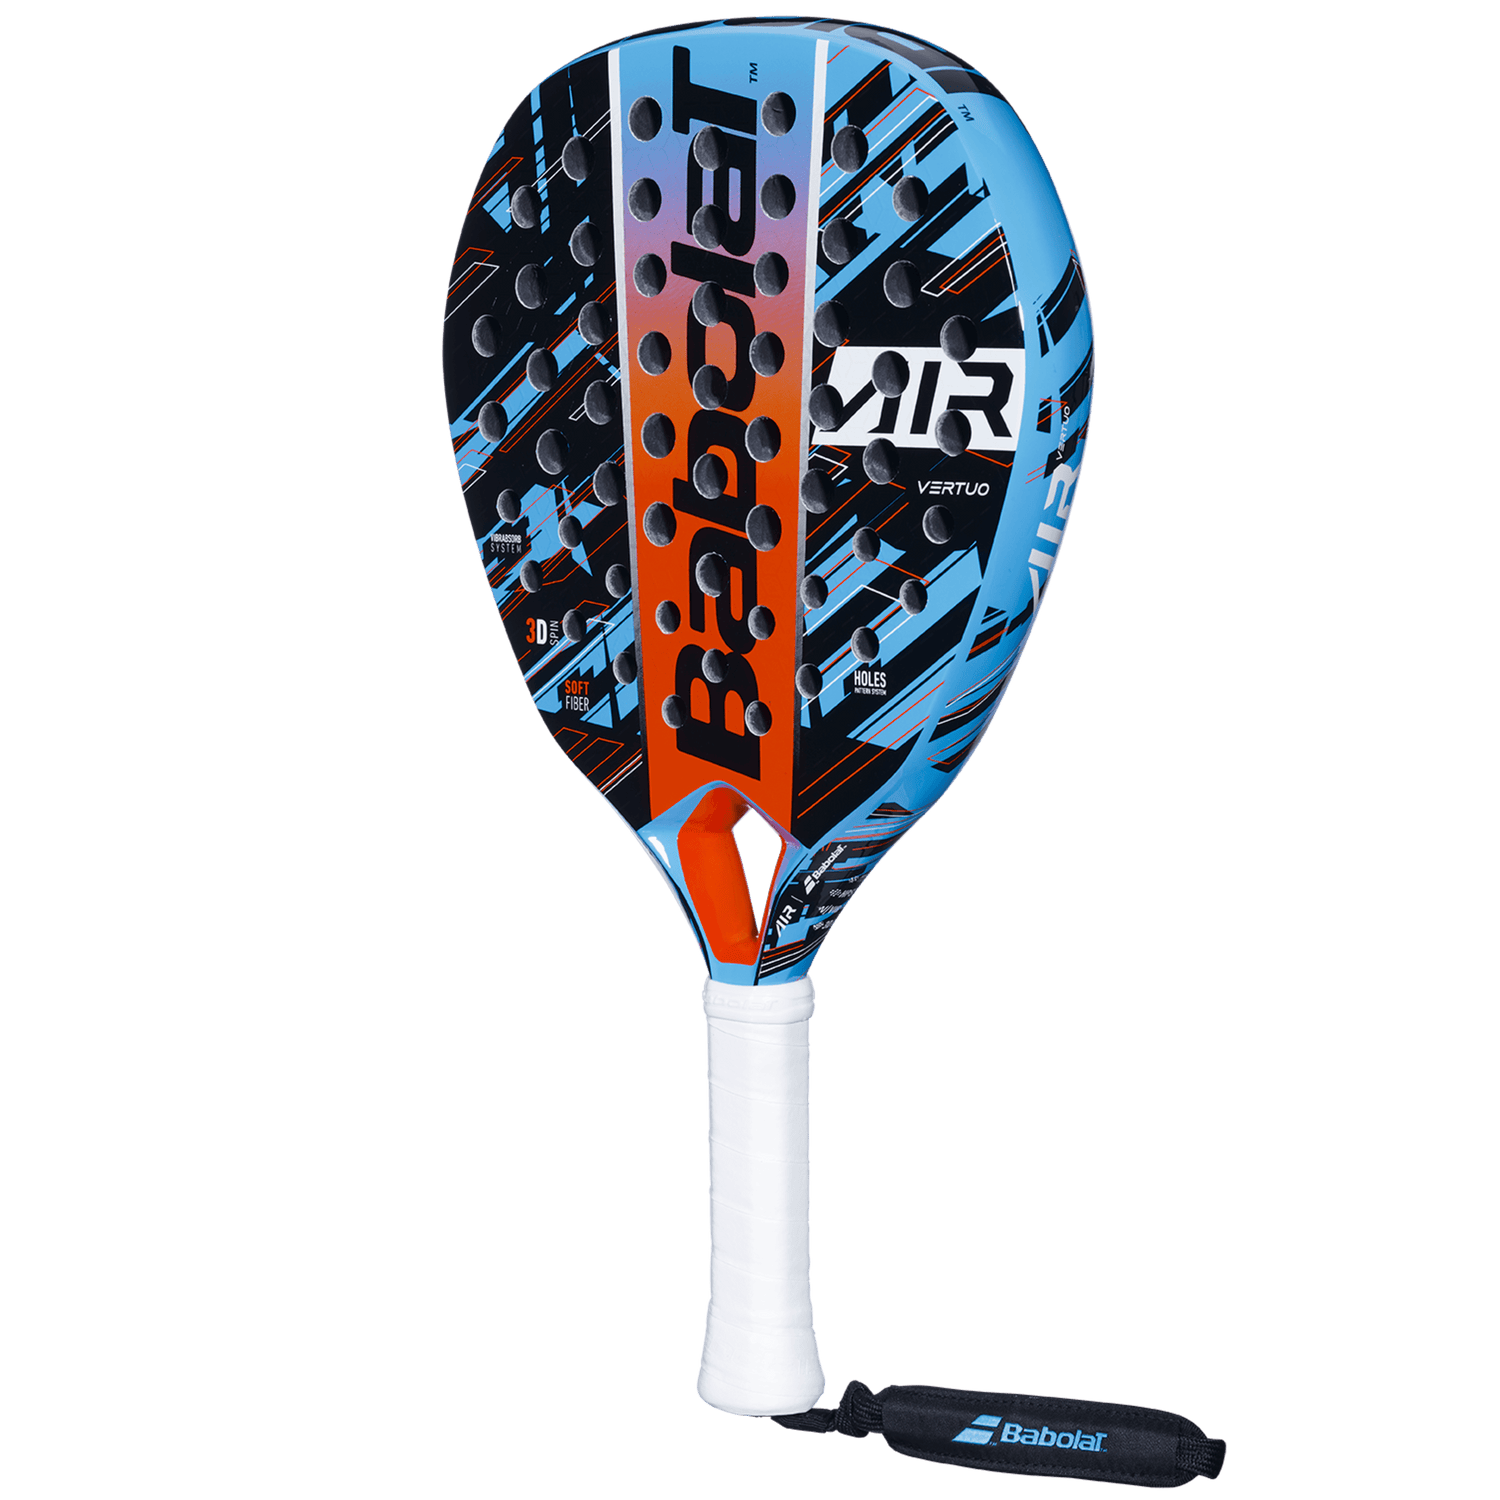 Babolat Air Vertuo Padel Racket with its unique carbon frame and fiberglass surface.